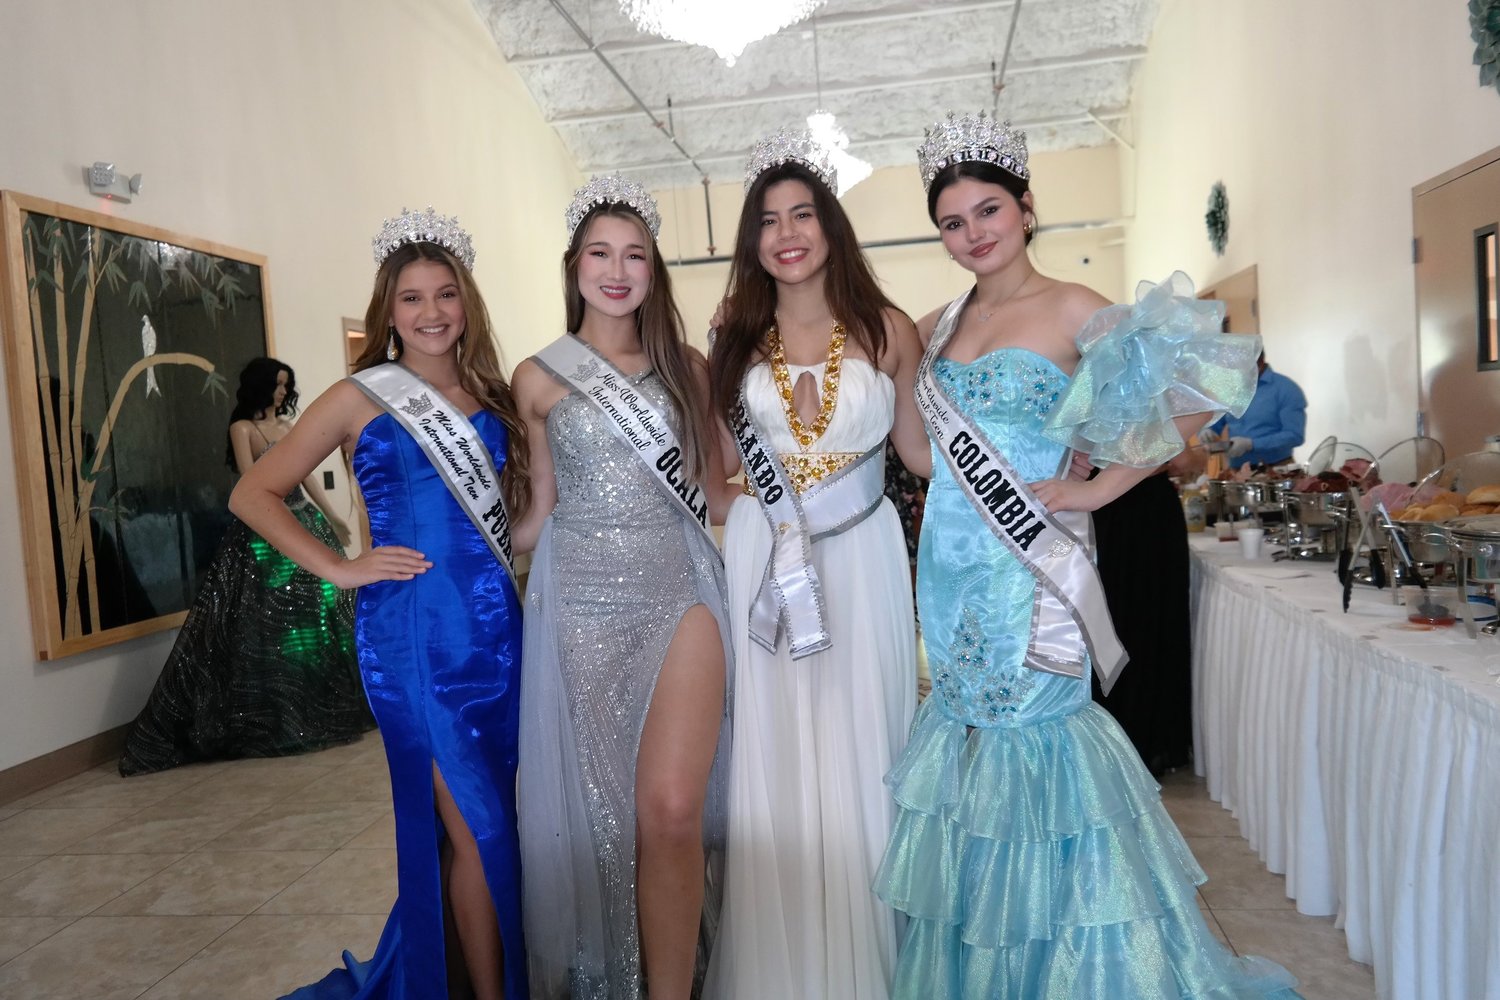 After the Veterans' Memorial Park dedication, a fashion and pageantry event was held.

Left to right are Miss Puerto Rico International, Miss Ocala , Florida, Miss Orlando, Florida and Miss Colombia International